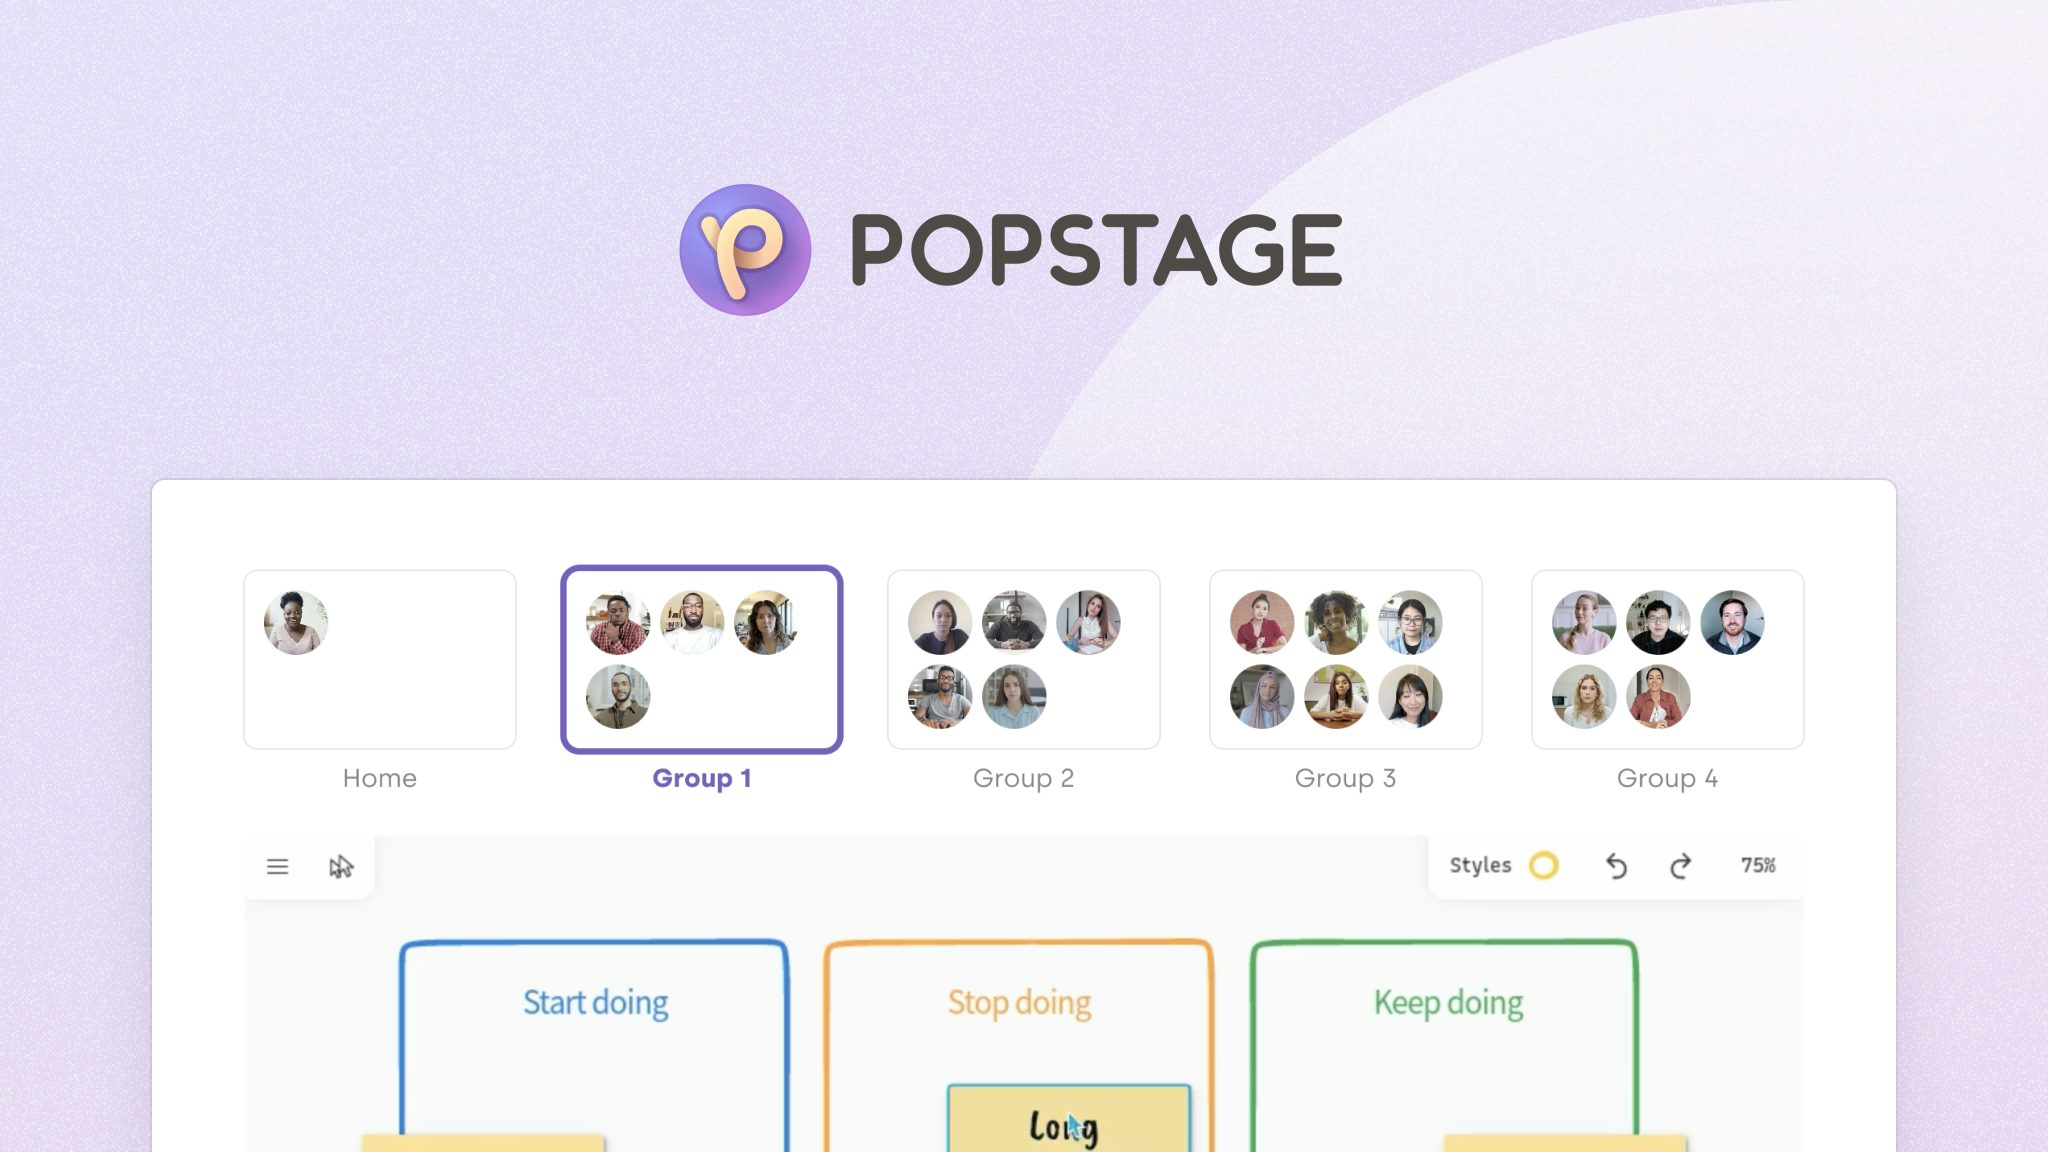 PopStage built all kinds of collaborative experiences with tailored permissions for their users using Liveblocks